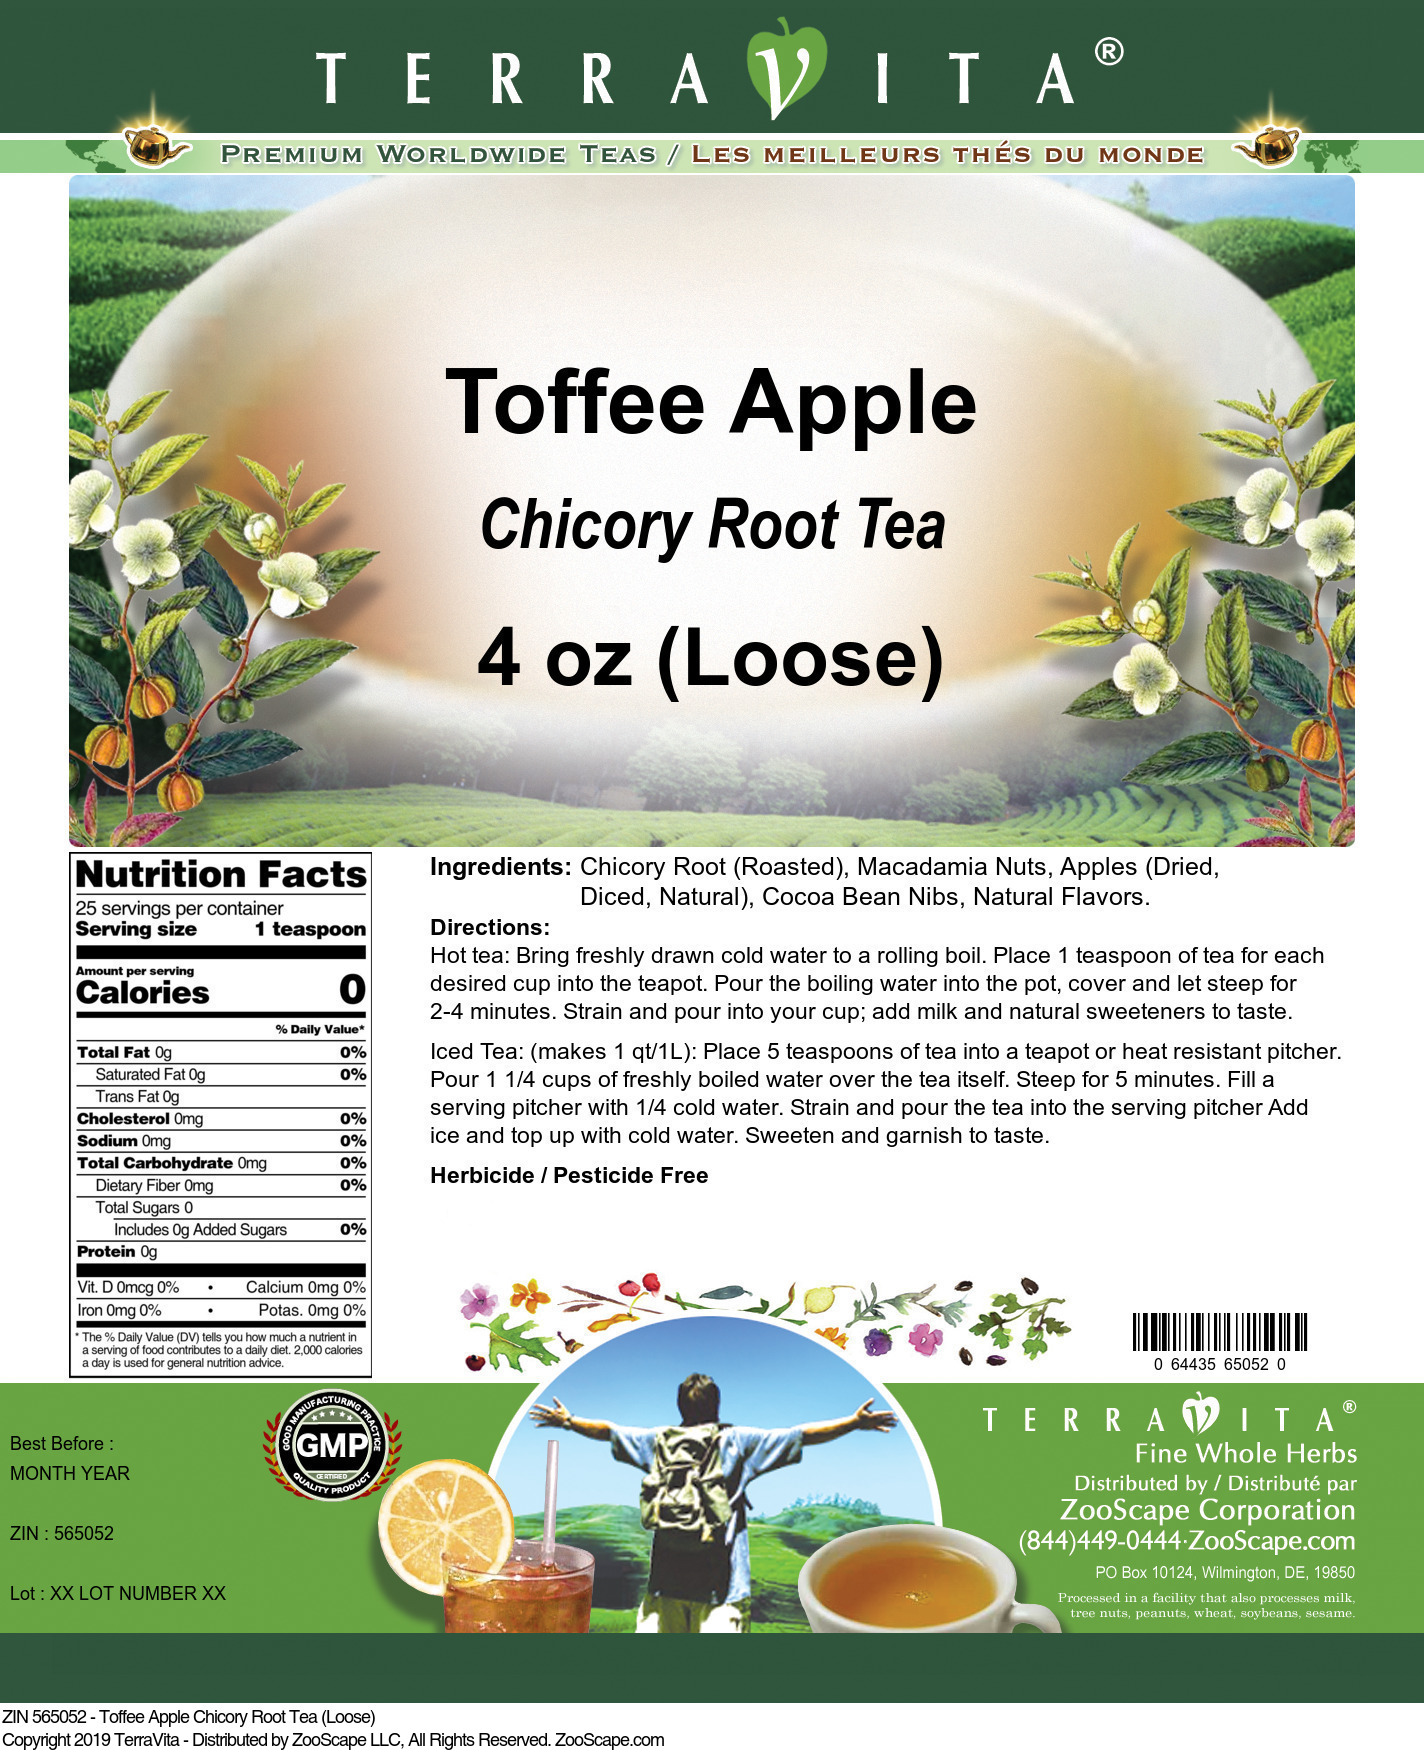 Toffee Apple Chicory Root Tea (Loose) - Label